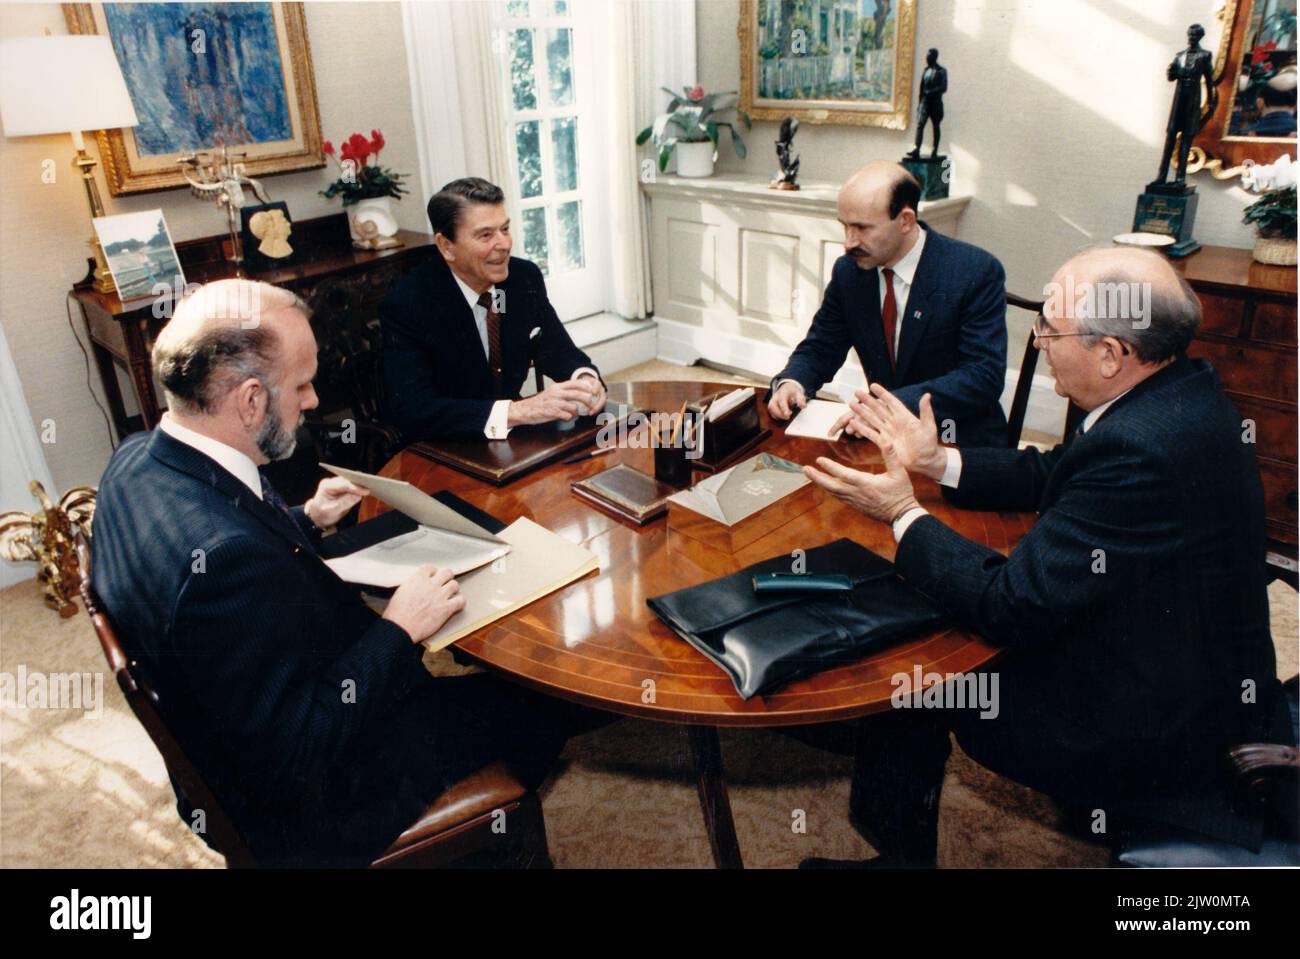 United States President Ronald Reagan and General Secretary of the Communist Party of the Soviet Union Mikhail Sergeyevich Gorbachev meet in the Oval Office study during the morning of Wednesday, December 9, 1987.  The U.S. and U.S.S.R. interpreters attended the meeting..Mandatory Credit: Bill Fitz-Patrick - White House via CNP /MediaPunch Stock Photo